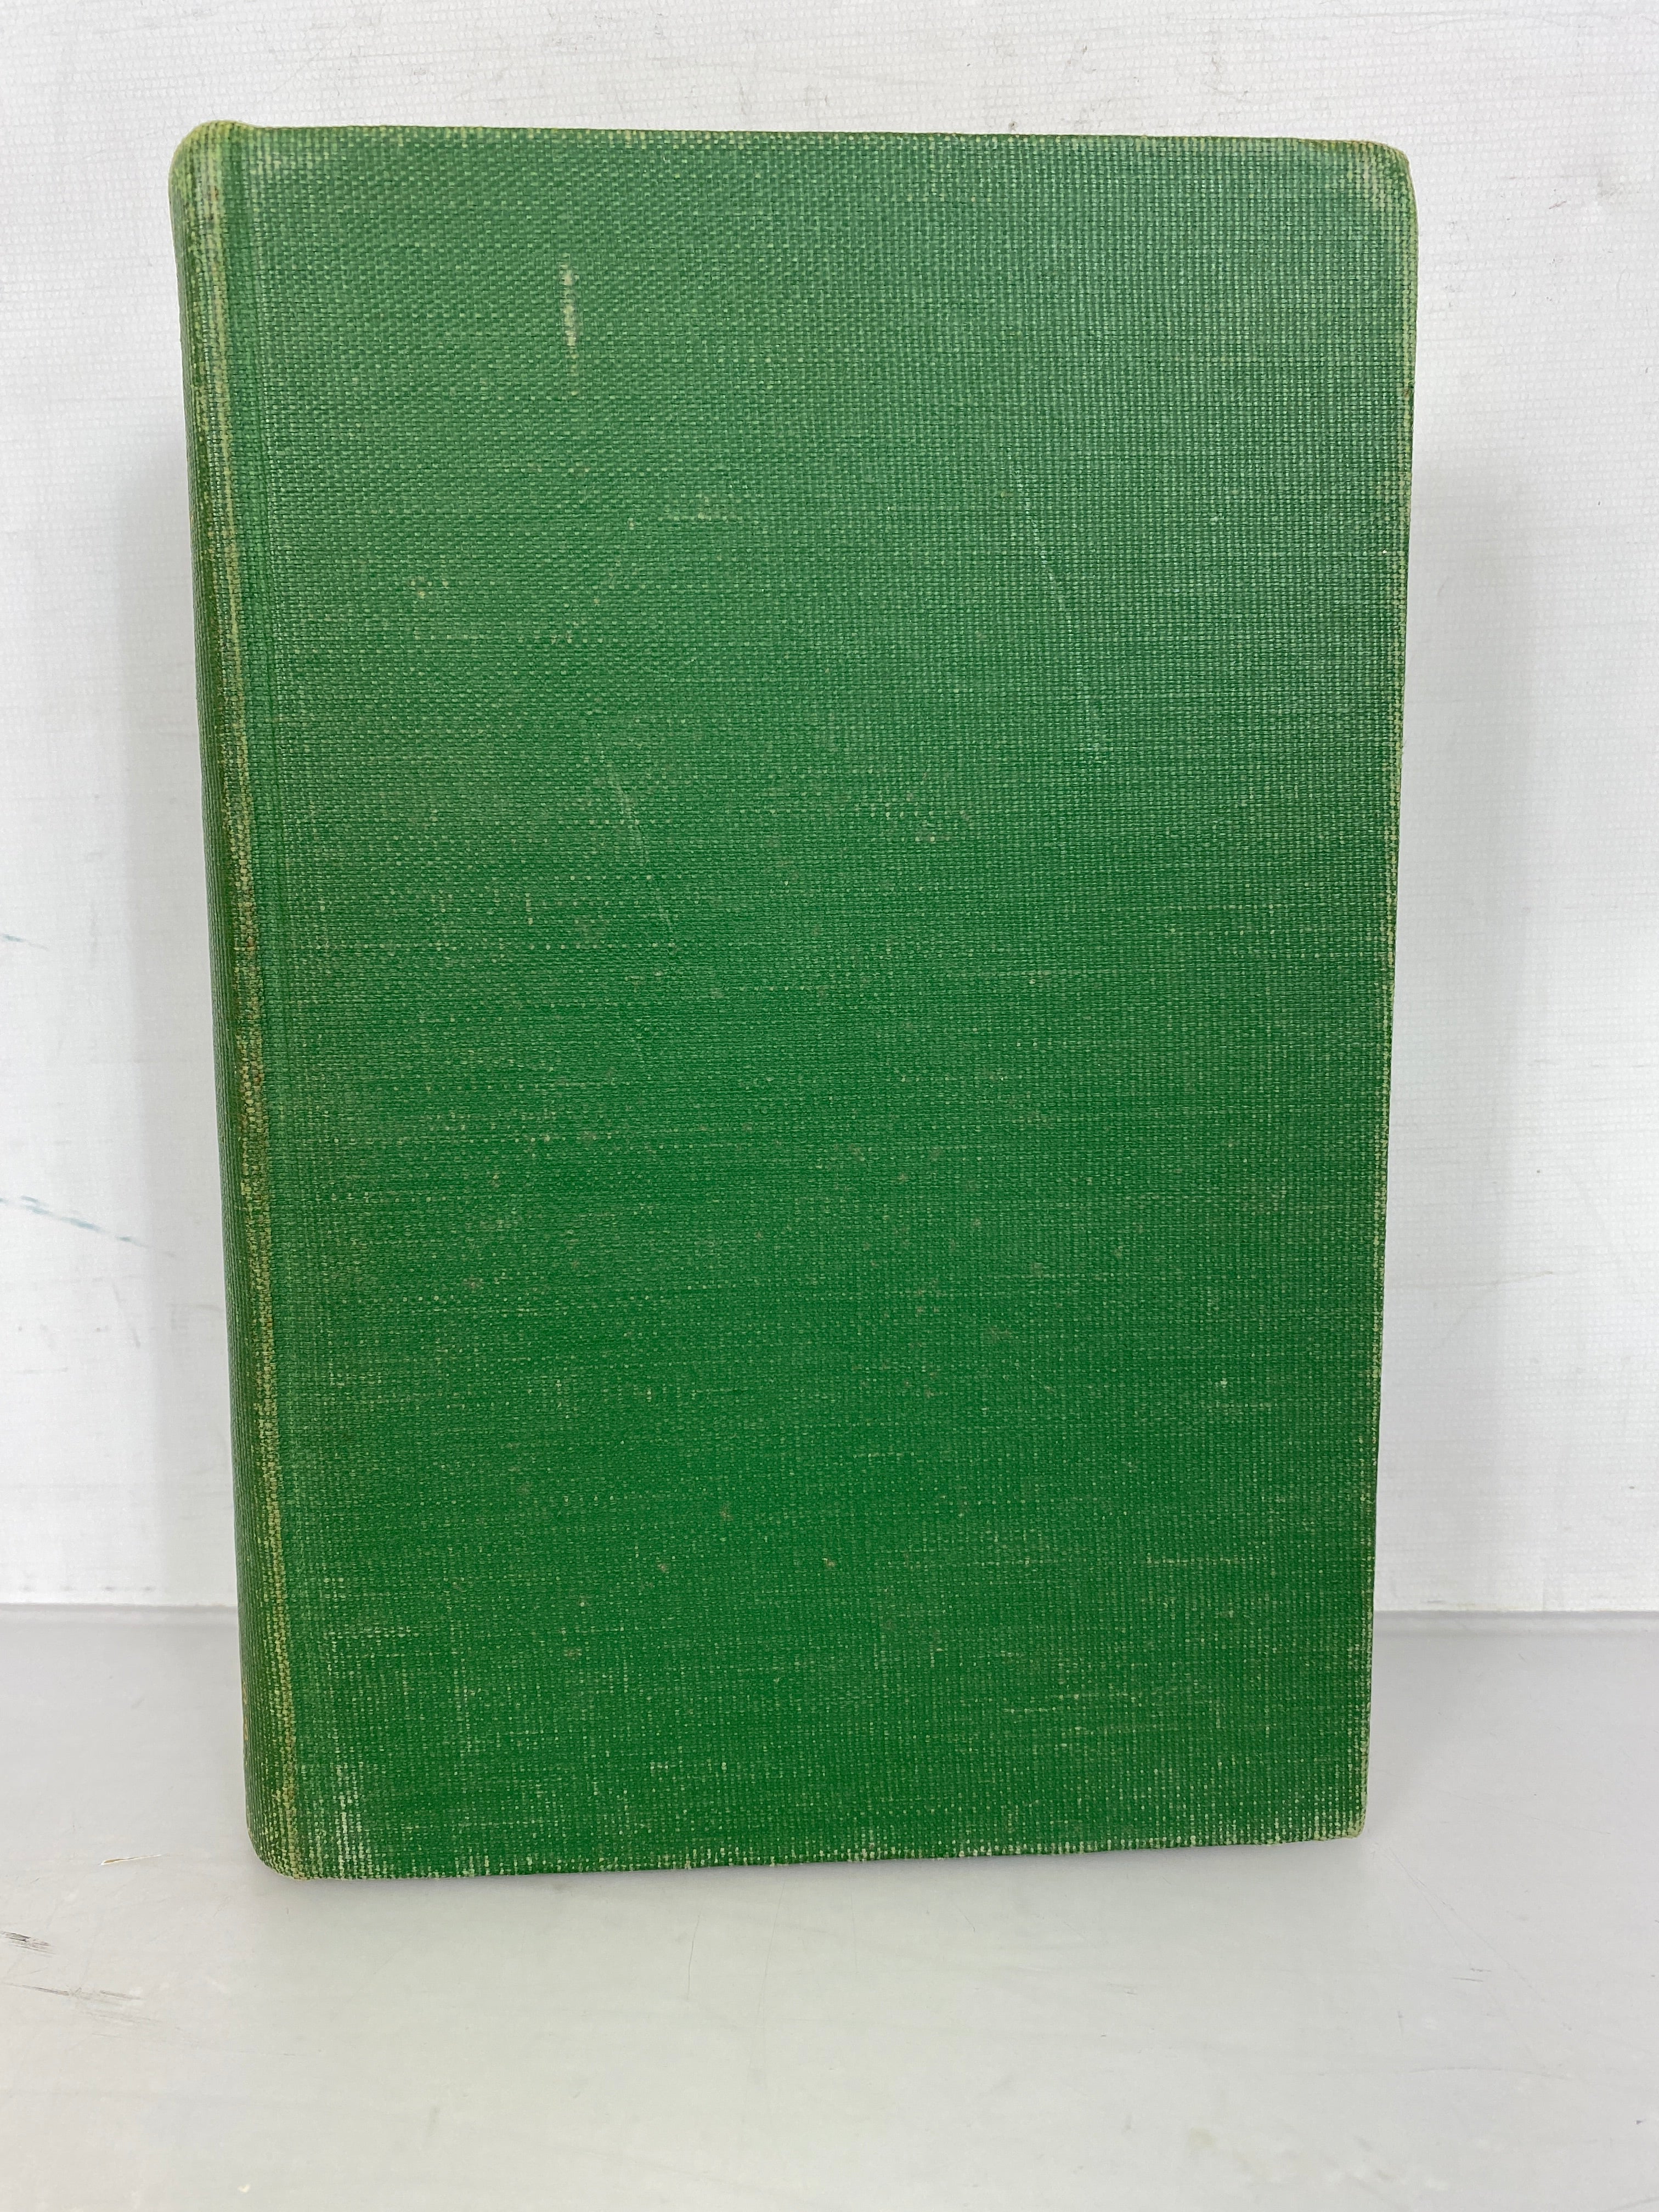 Bailey's Text-Book of Histology Eleventh Edition 1945 HC